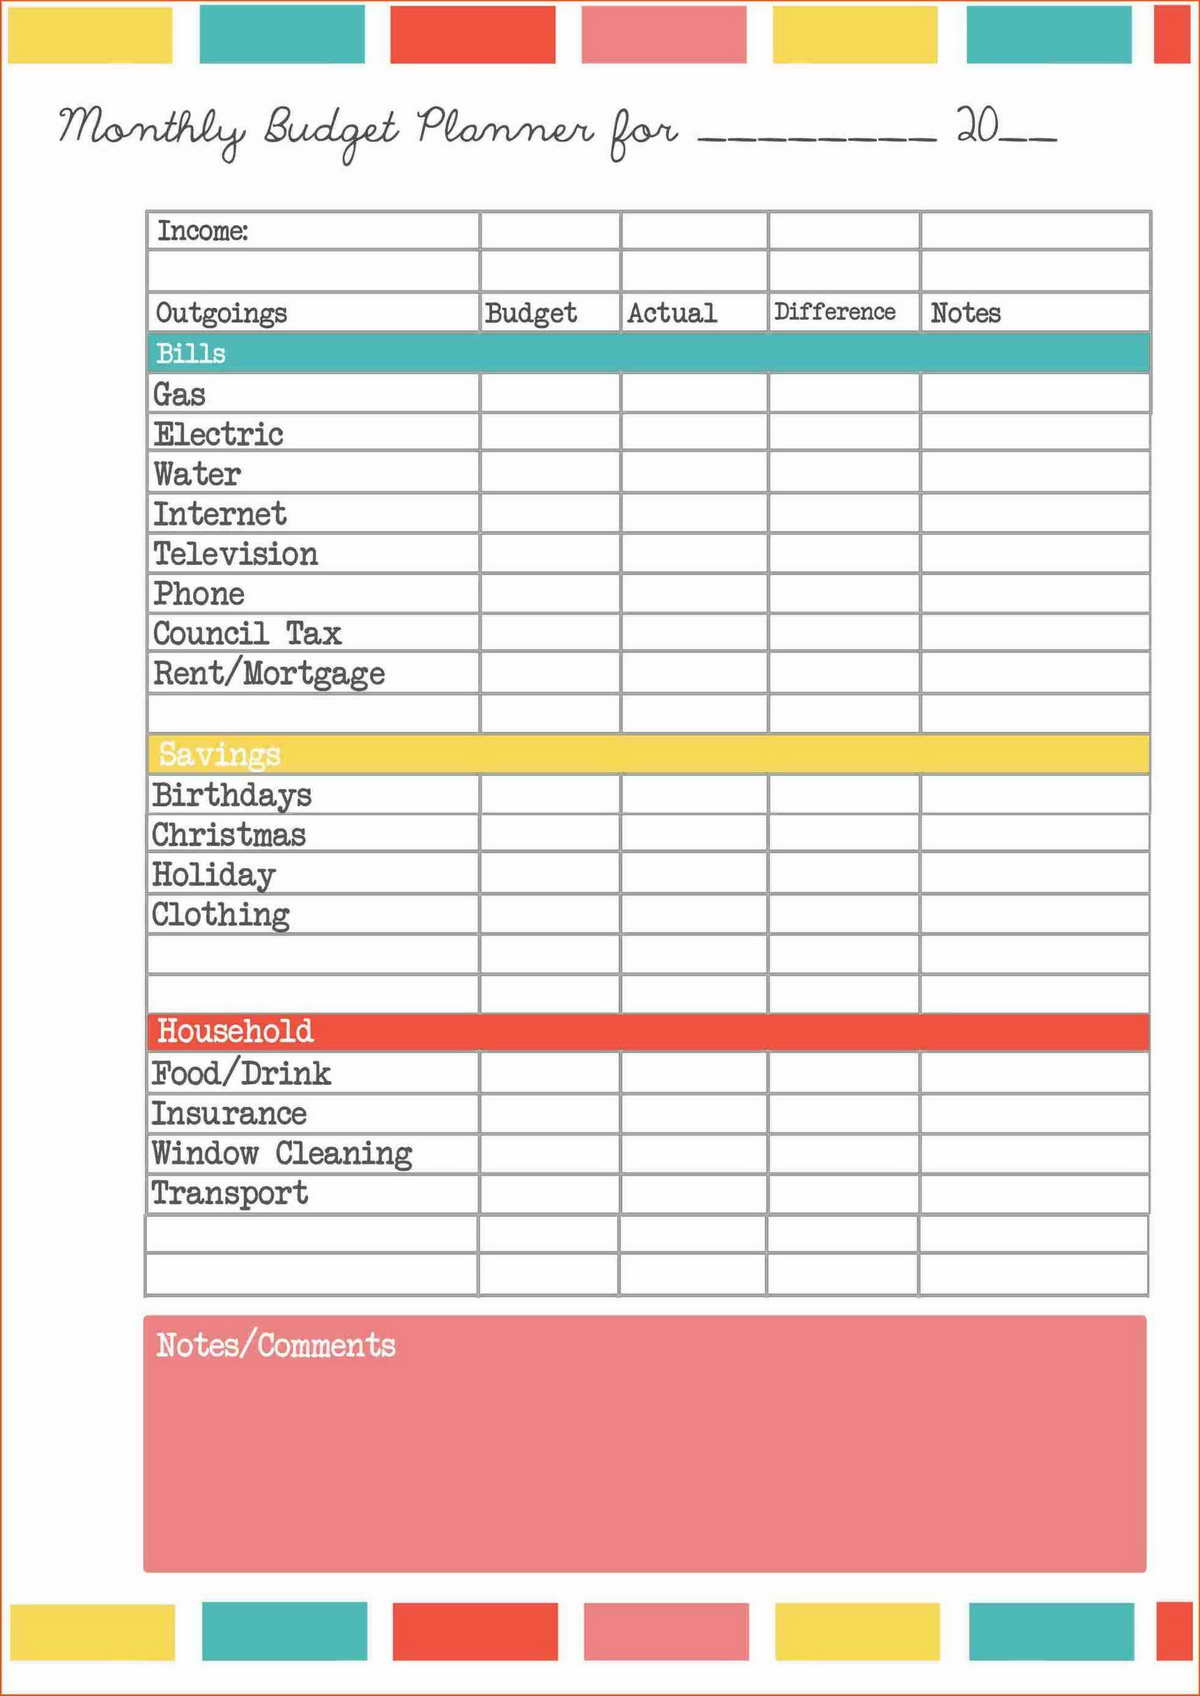 Small Business Expenses Spreadsheet On Budget Spreadsheet Excel And Spreadsheet Examples For Small Business